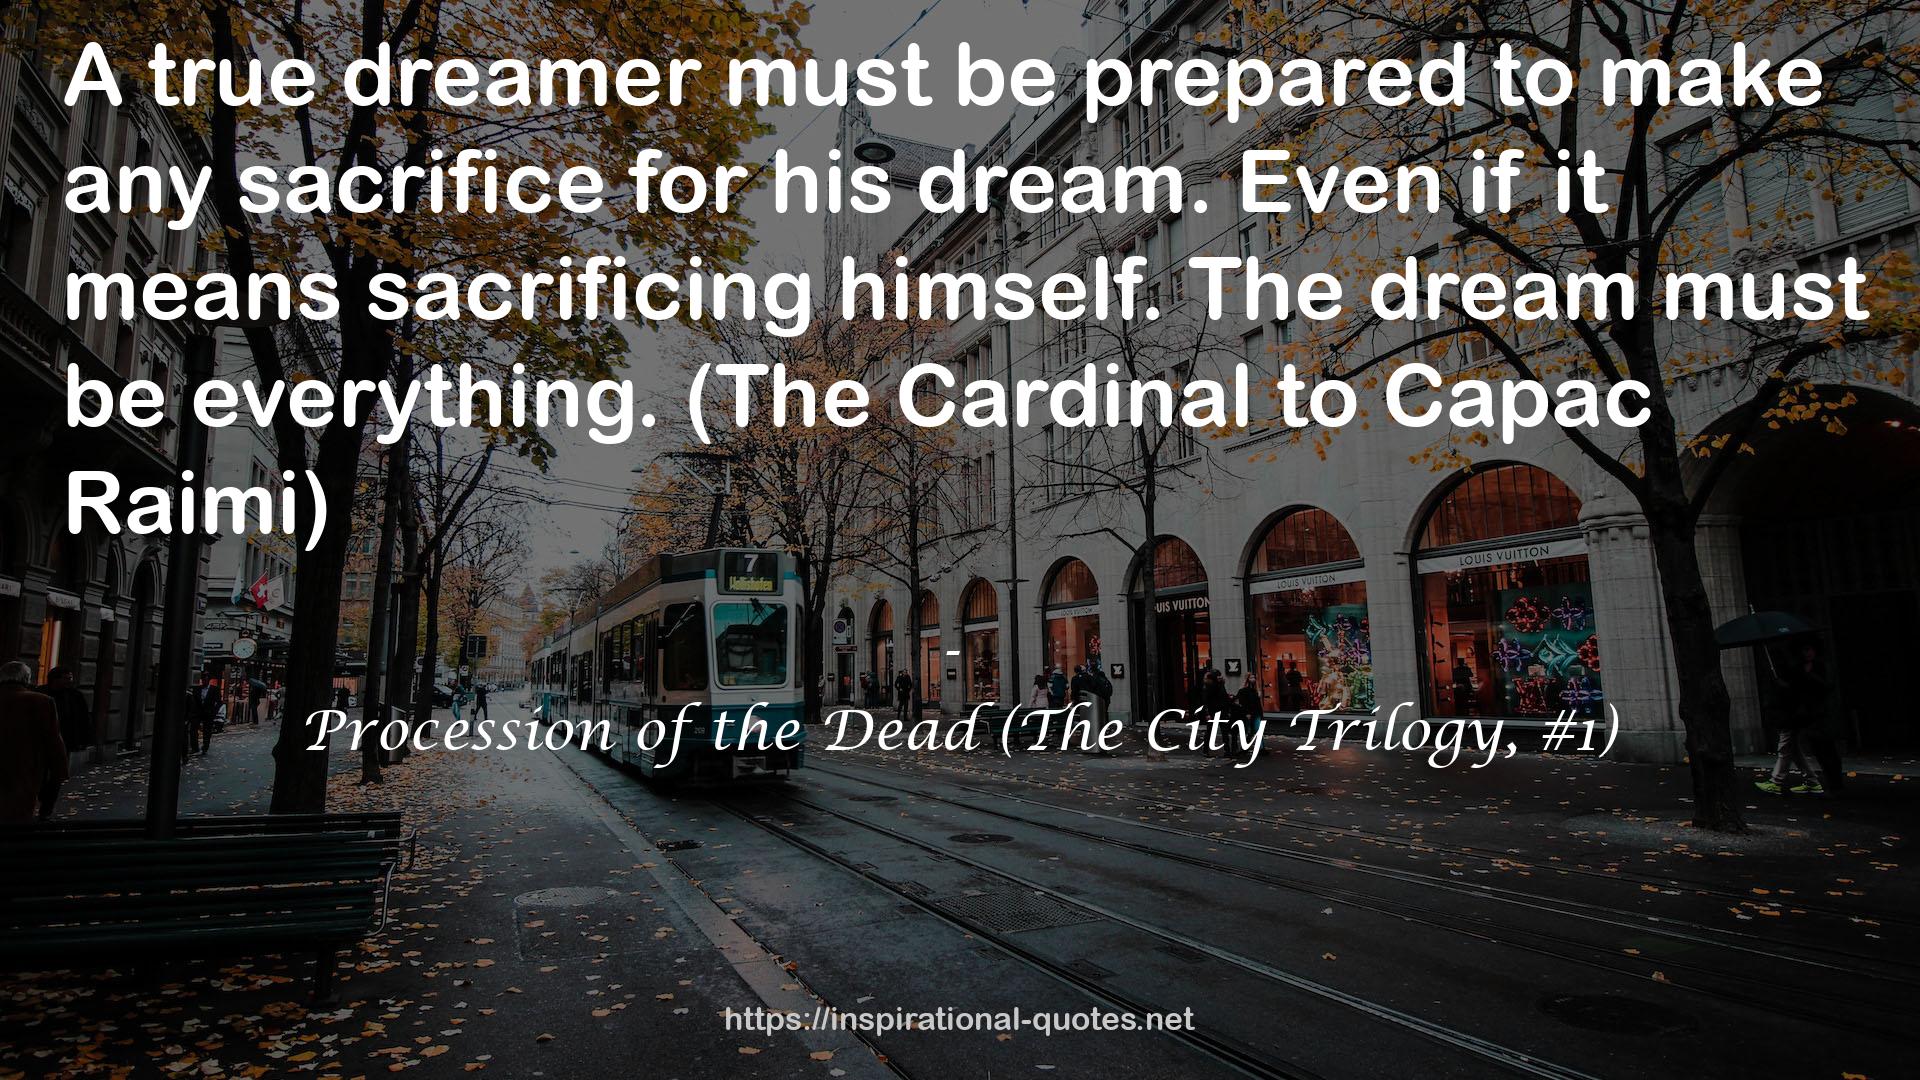 Procession of the Dead (The City Trilogy, #1) QUOTES